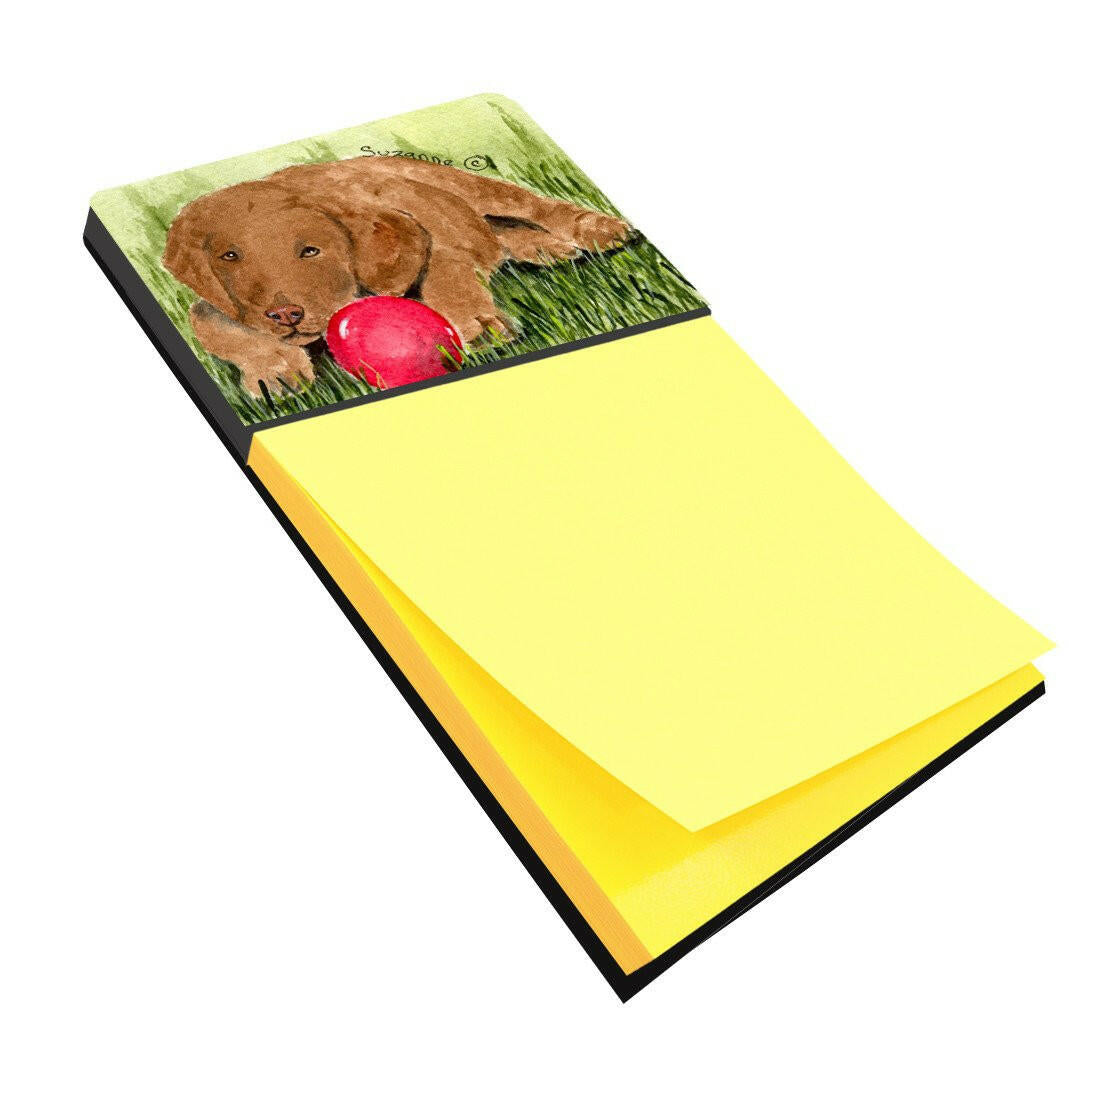 Curly Coated Retriever Refiillable Sticky Note Holder or Postit Note Dispenser SS8684SN by Caroline's Treasures